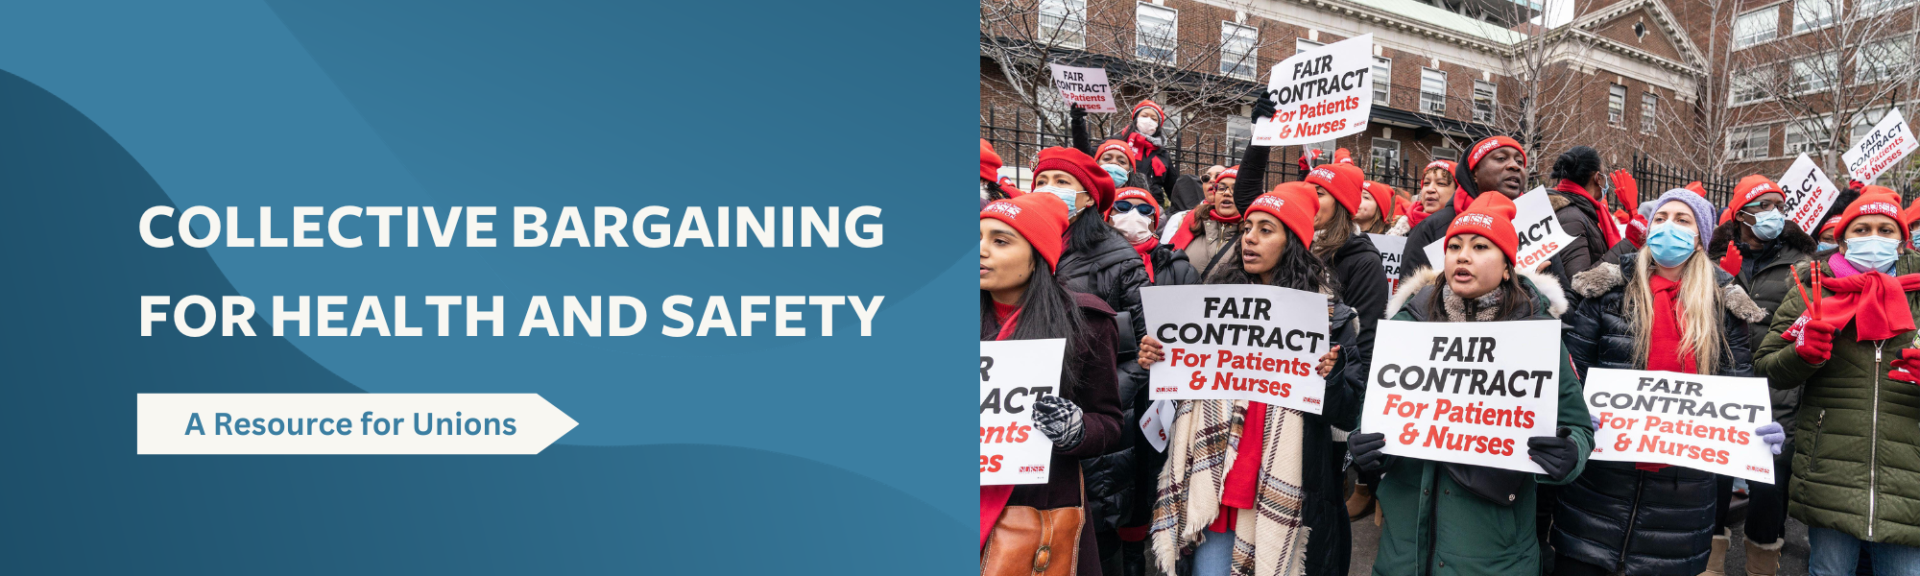 Collective Bargaining for Health and Safety page title - including an image of workers demonstrating.